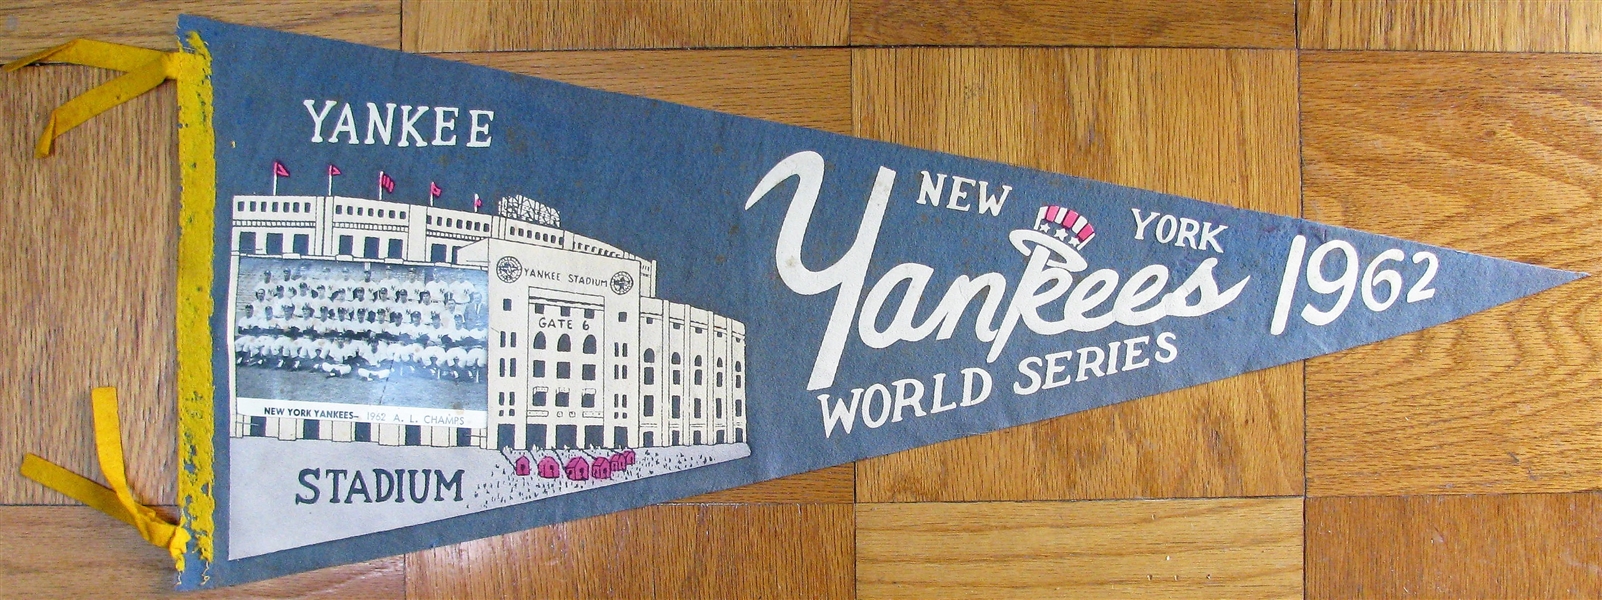 1962 NEW YORK YANKEES WORLD SERIES PICTURE PENNANT